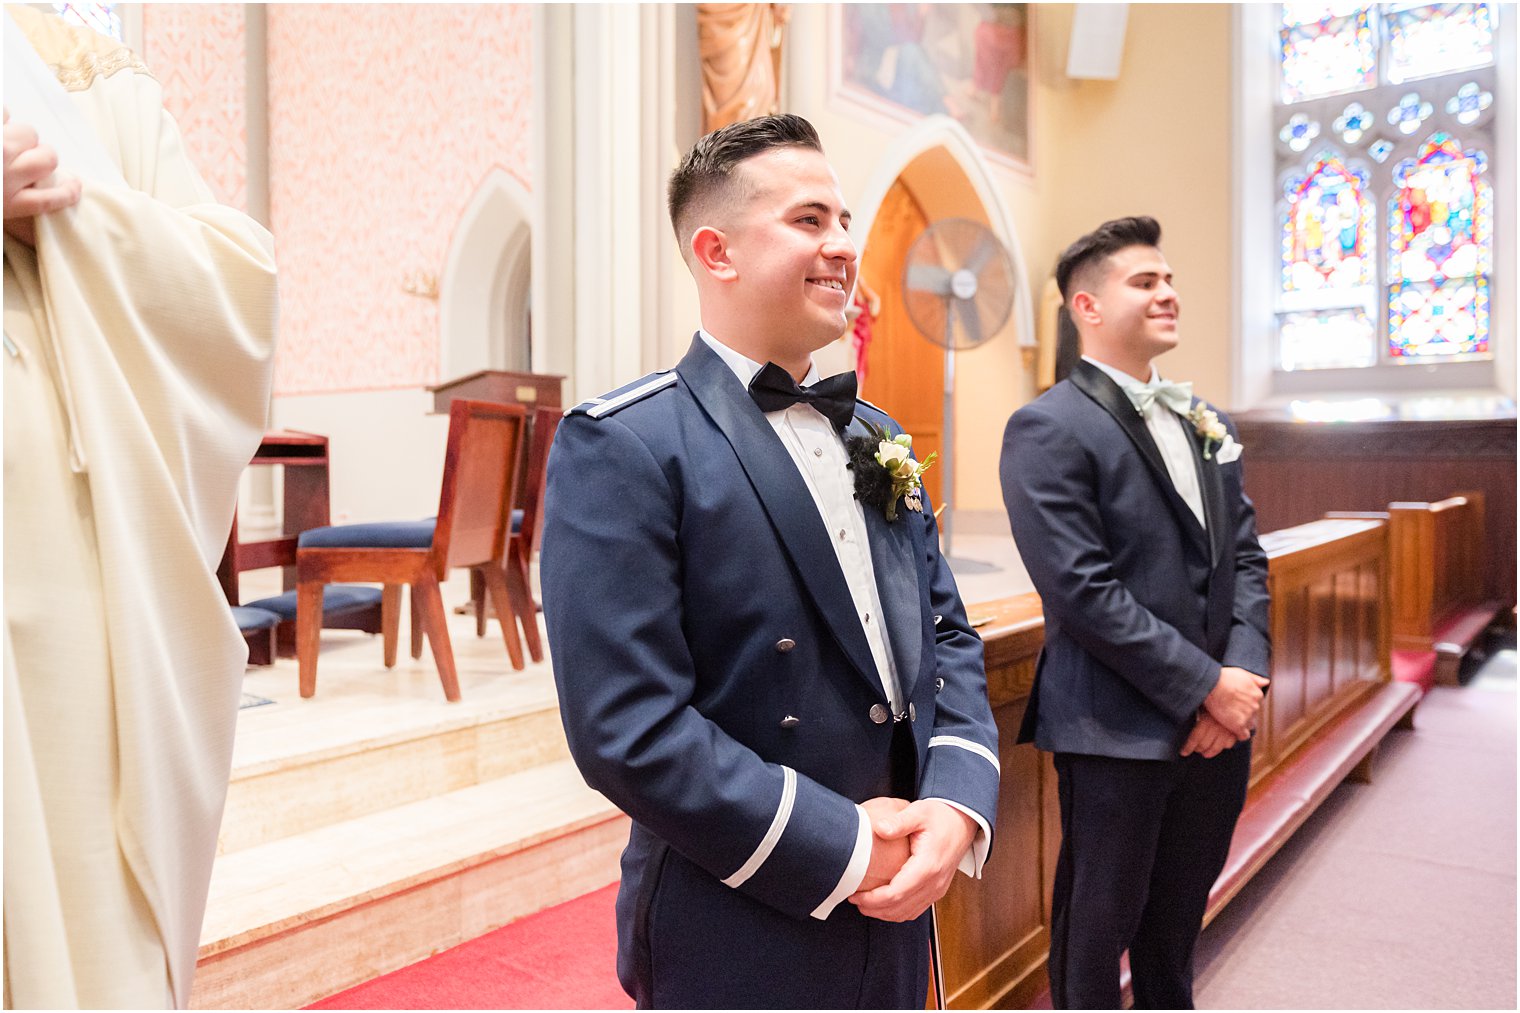 groom in military uniform watches bride enter wedding ceremony at St. Peter's Catholic Church